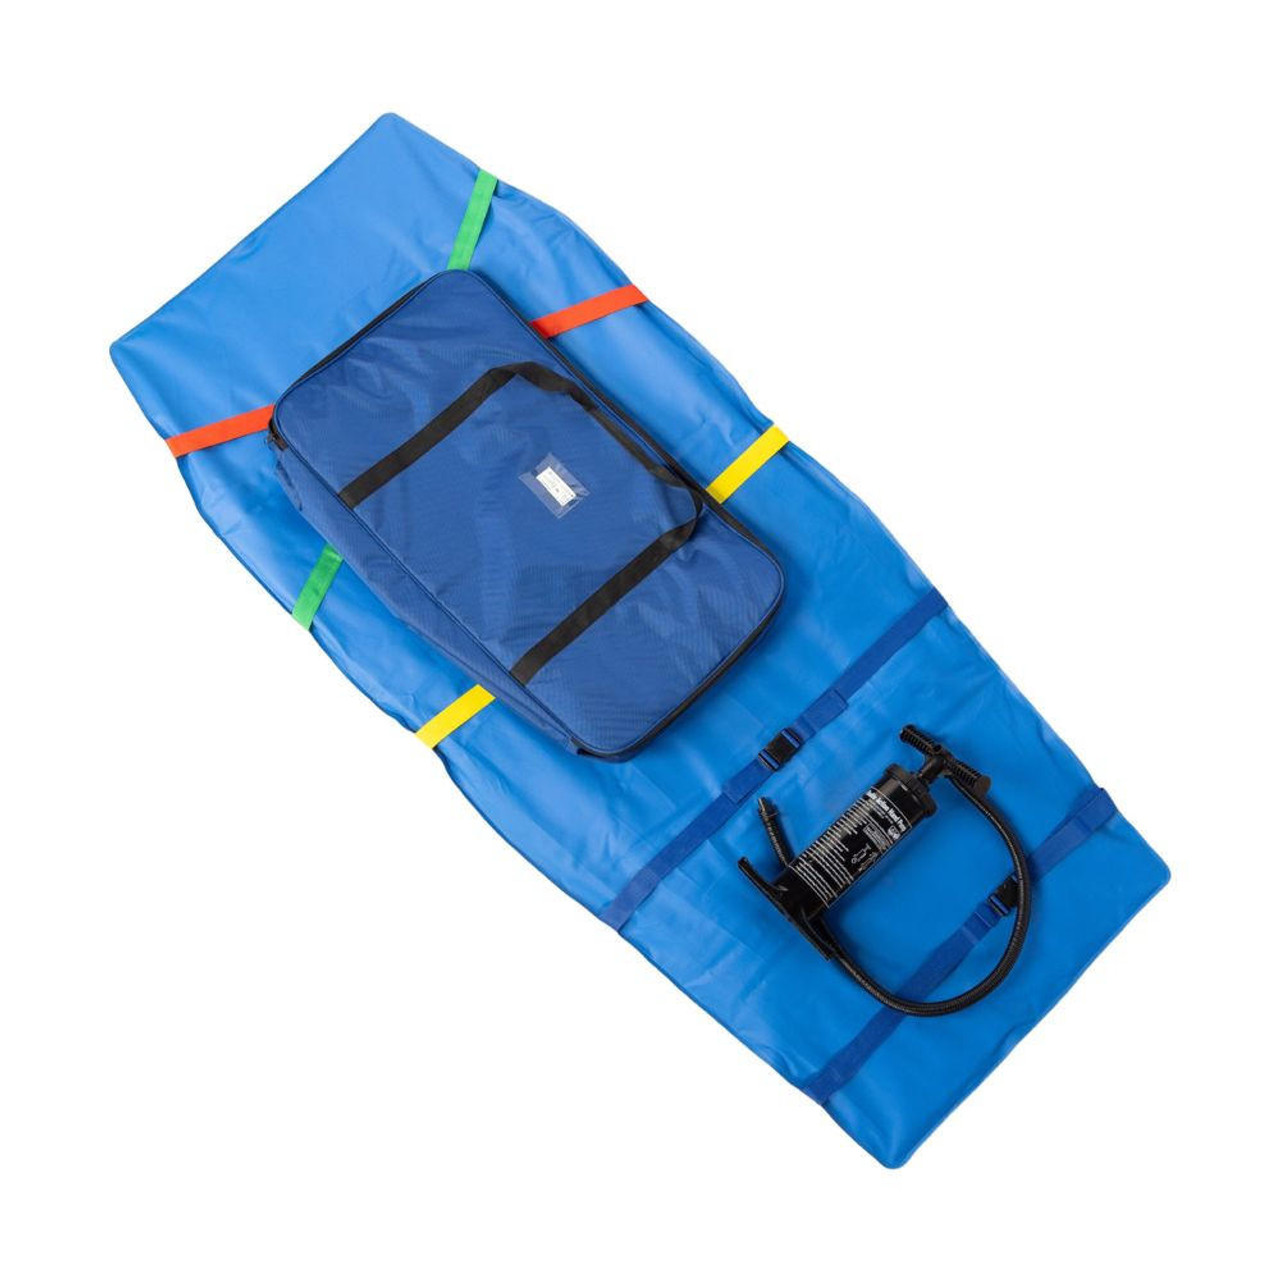 FAQ4583 Vacuum Mattress Stretcher Includes Pump and Bag for Safe Patient Immobilisation  Zafety 